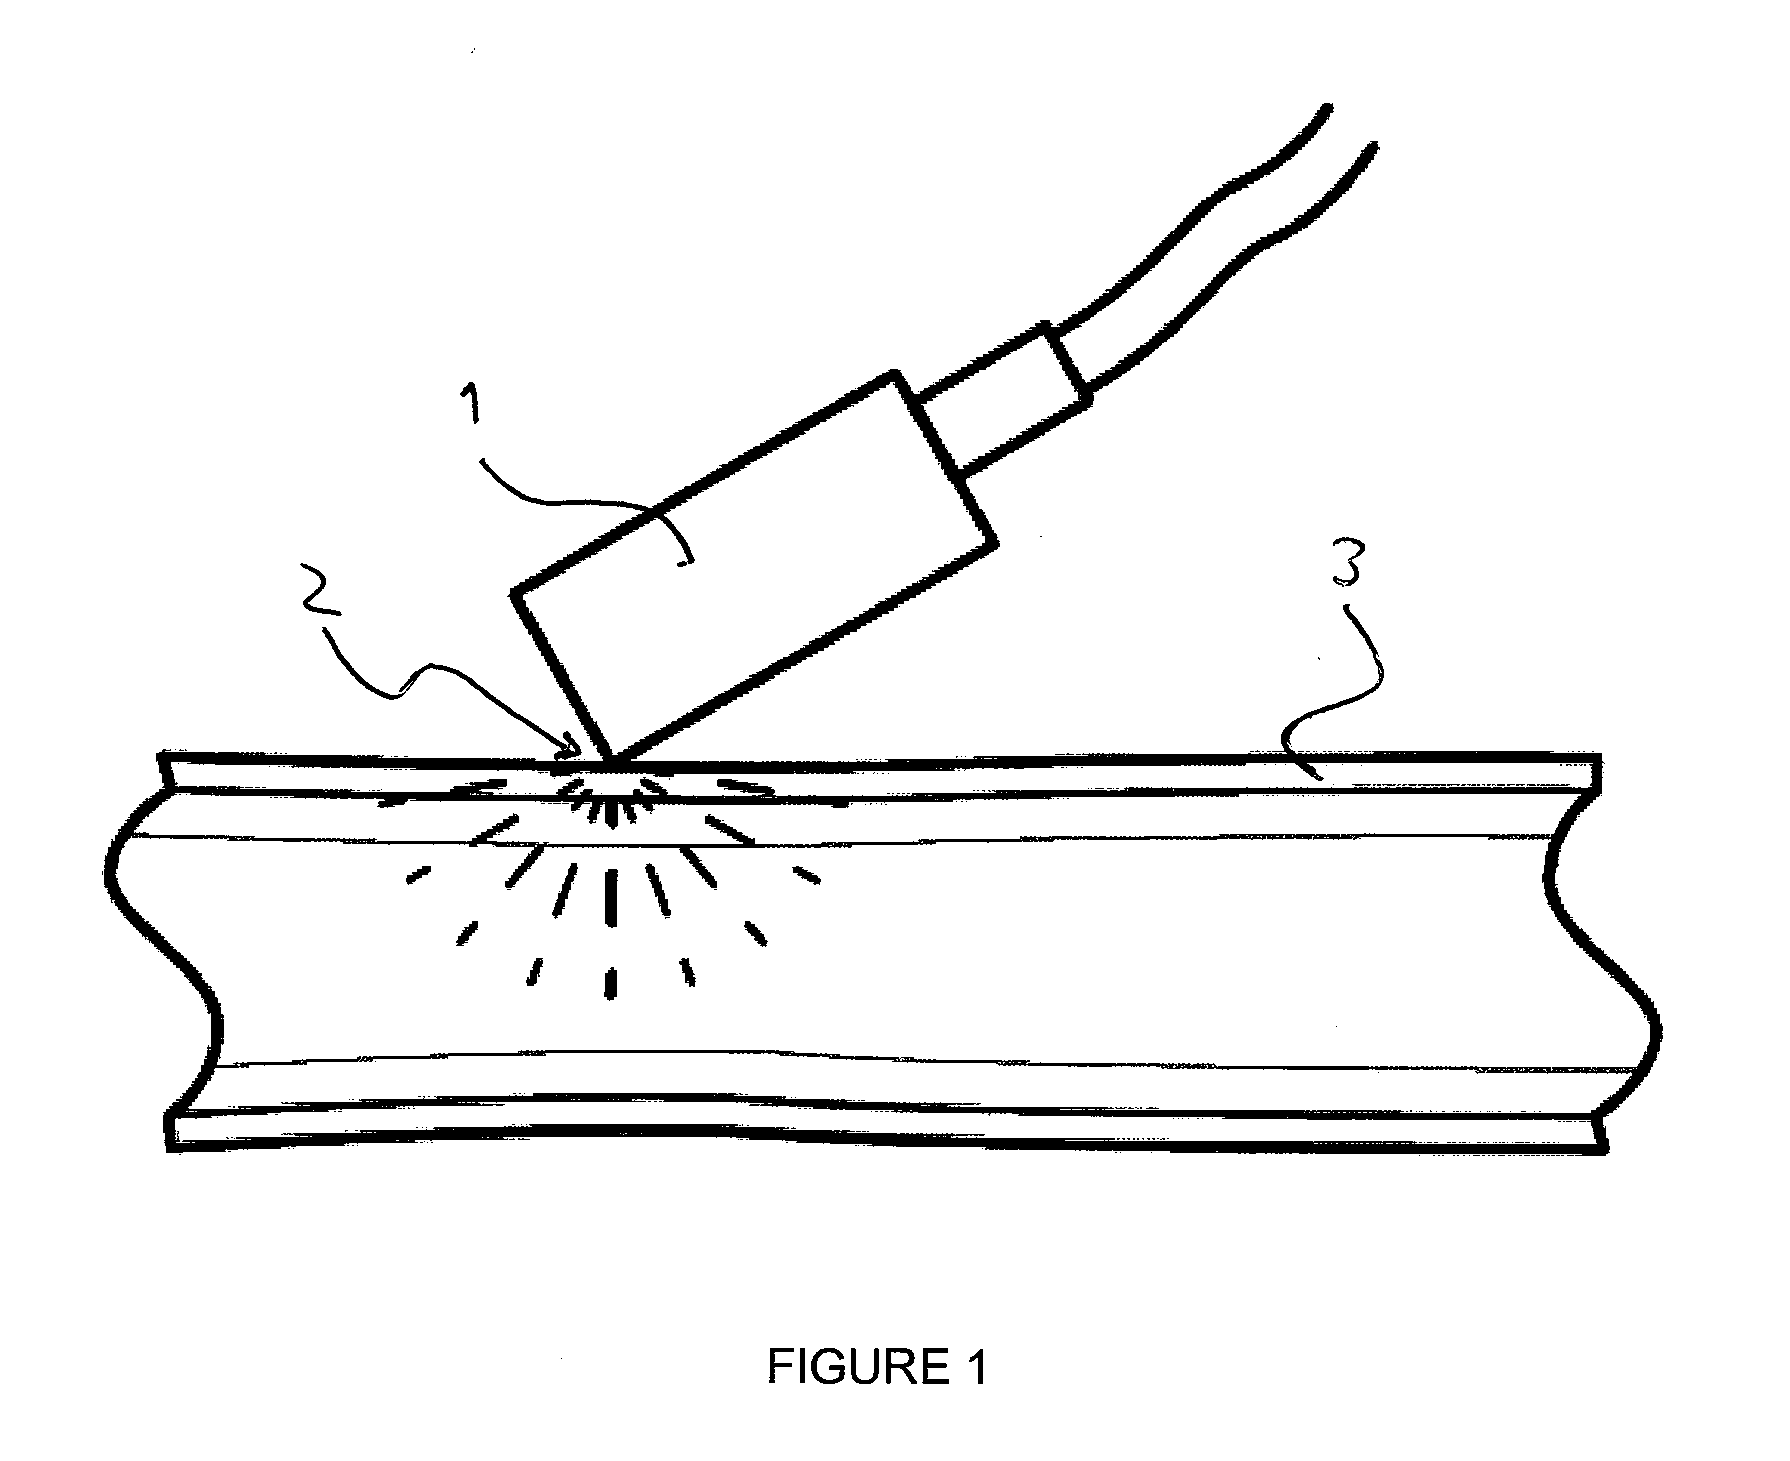 Treatment apparatus for external application to a mammal body